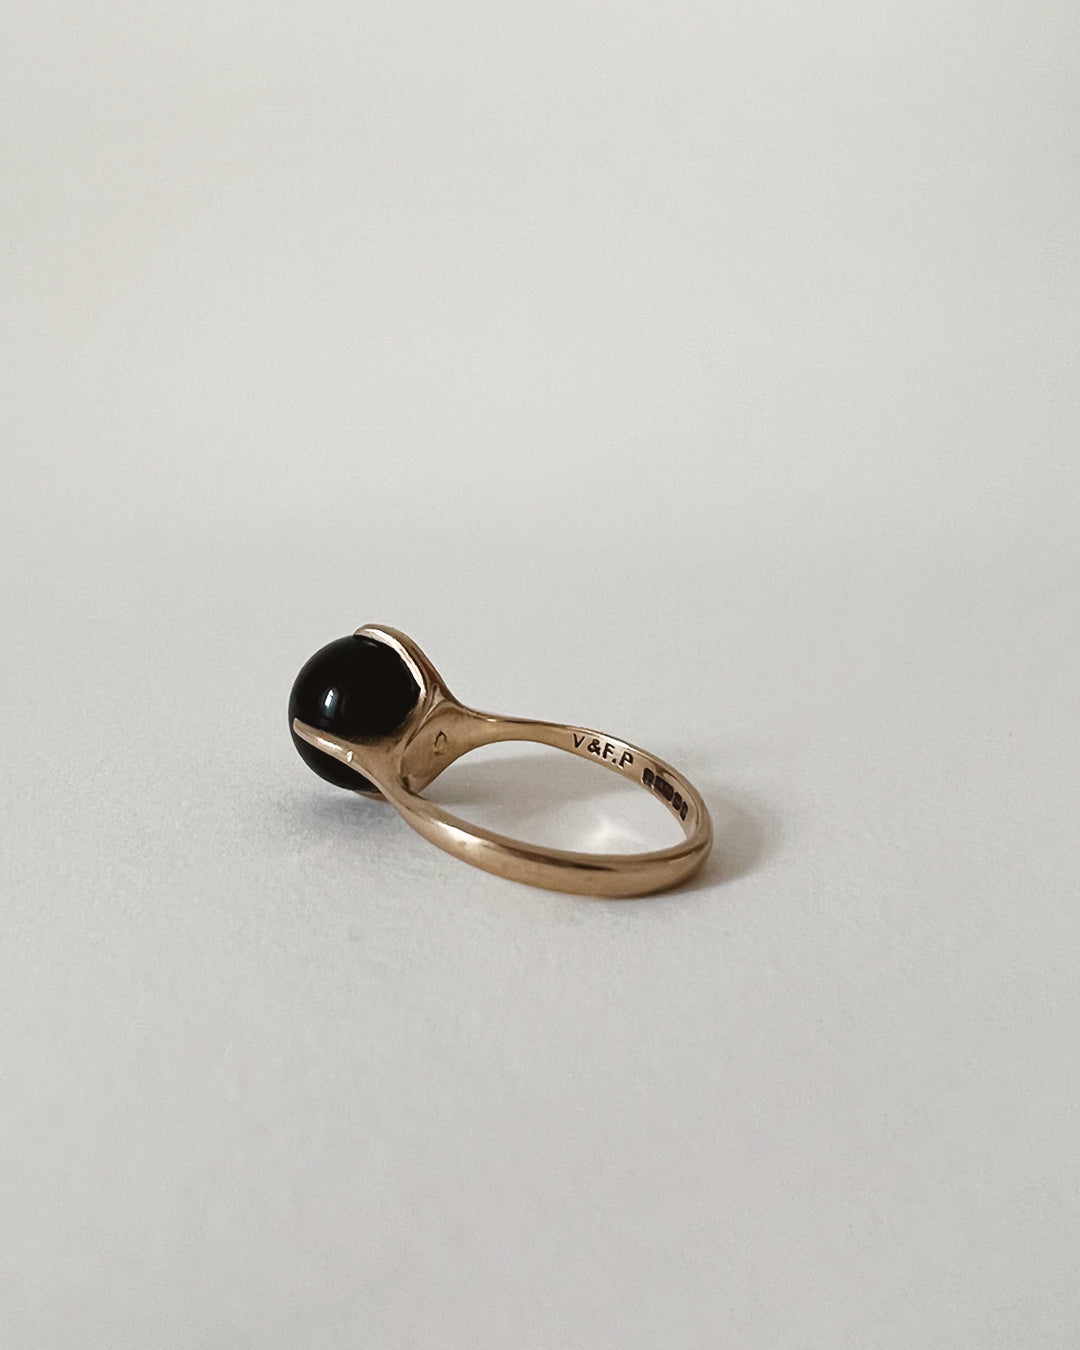 STATEMENT SPHERE ONYX RING, 9CT GOLD